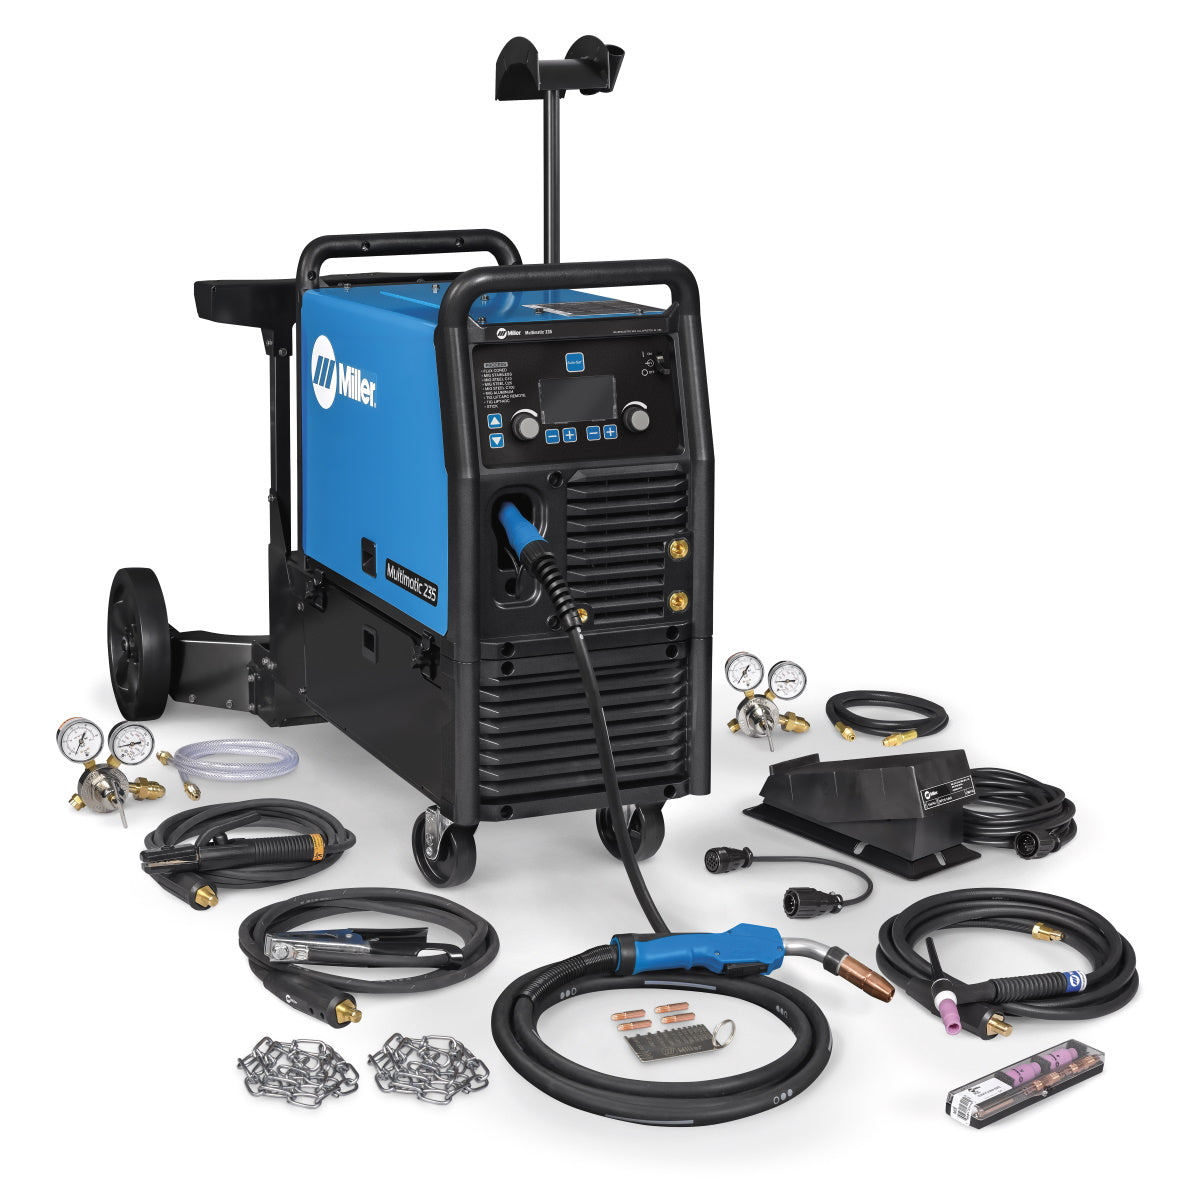 Miller Multimatic 235 Multiprocess Welder w/Dual Cylinder Cart and TIG Kit (951847)